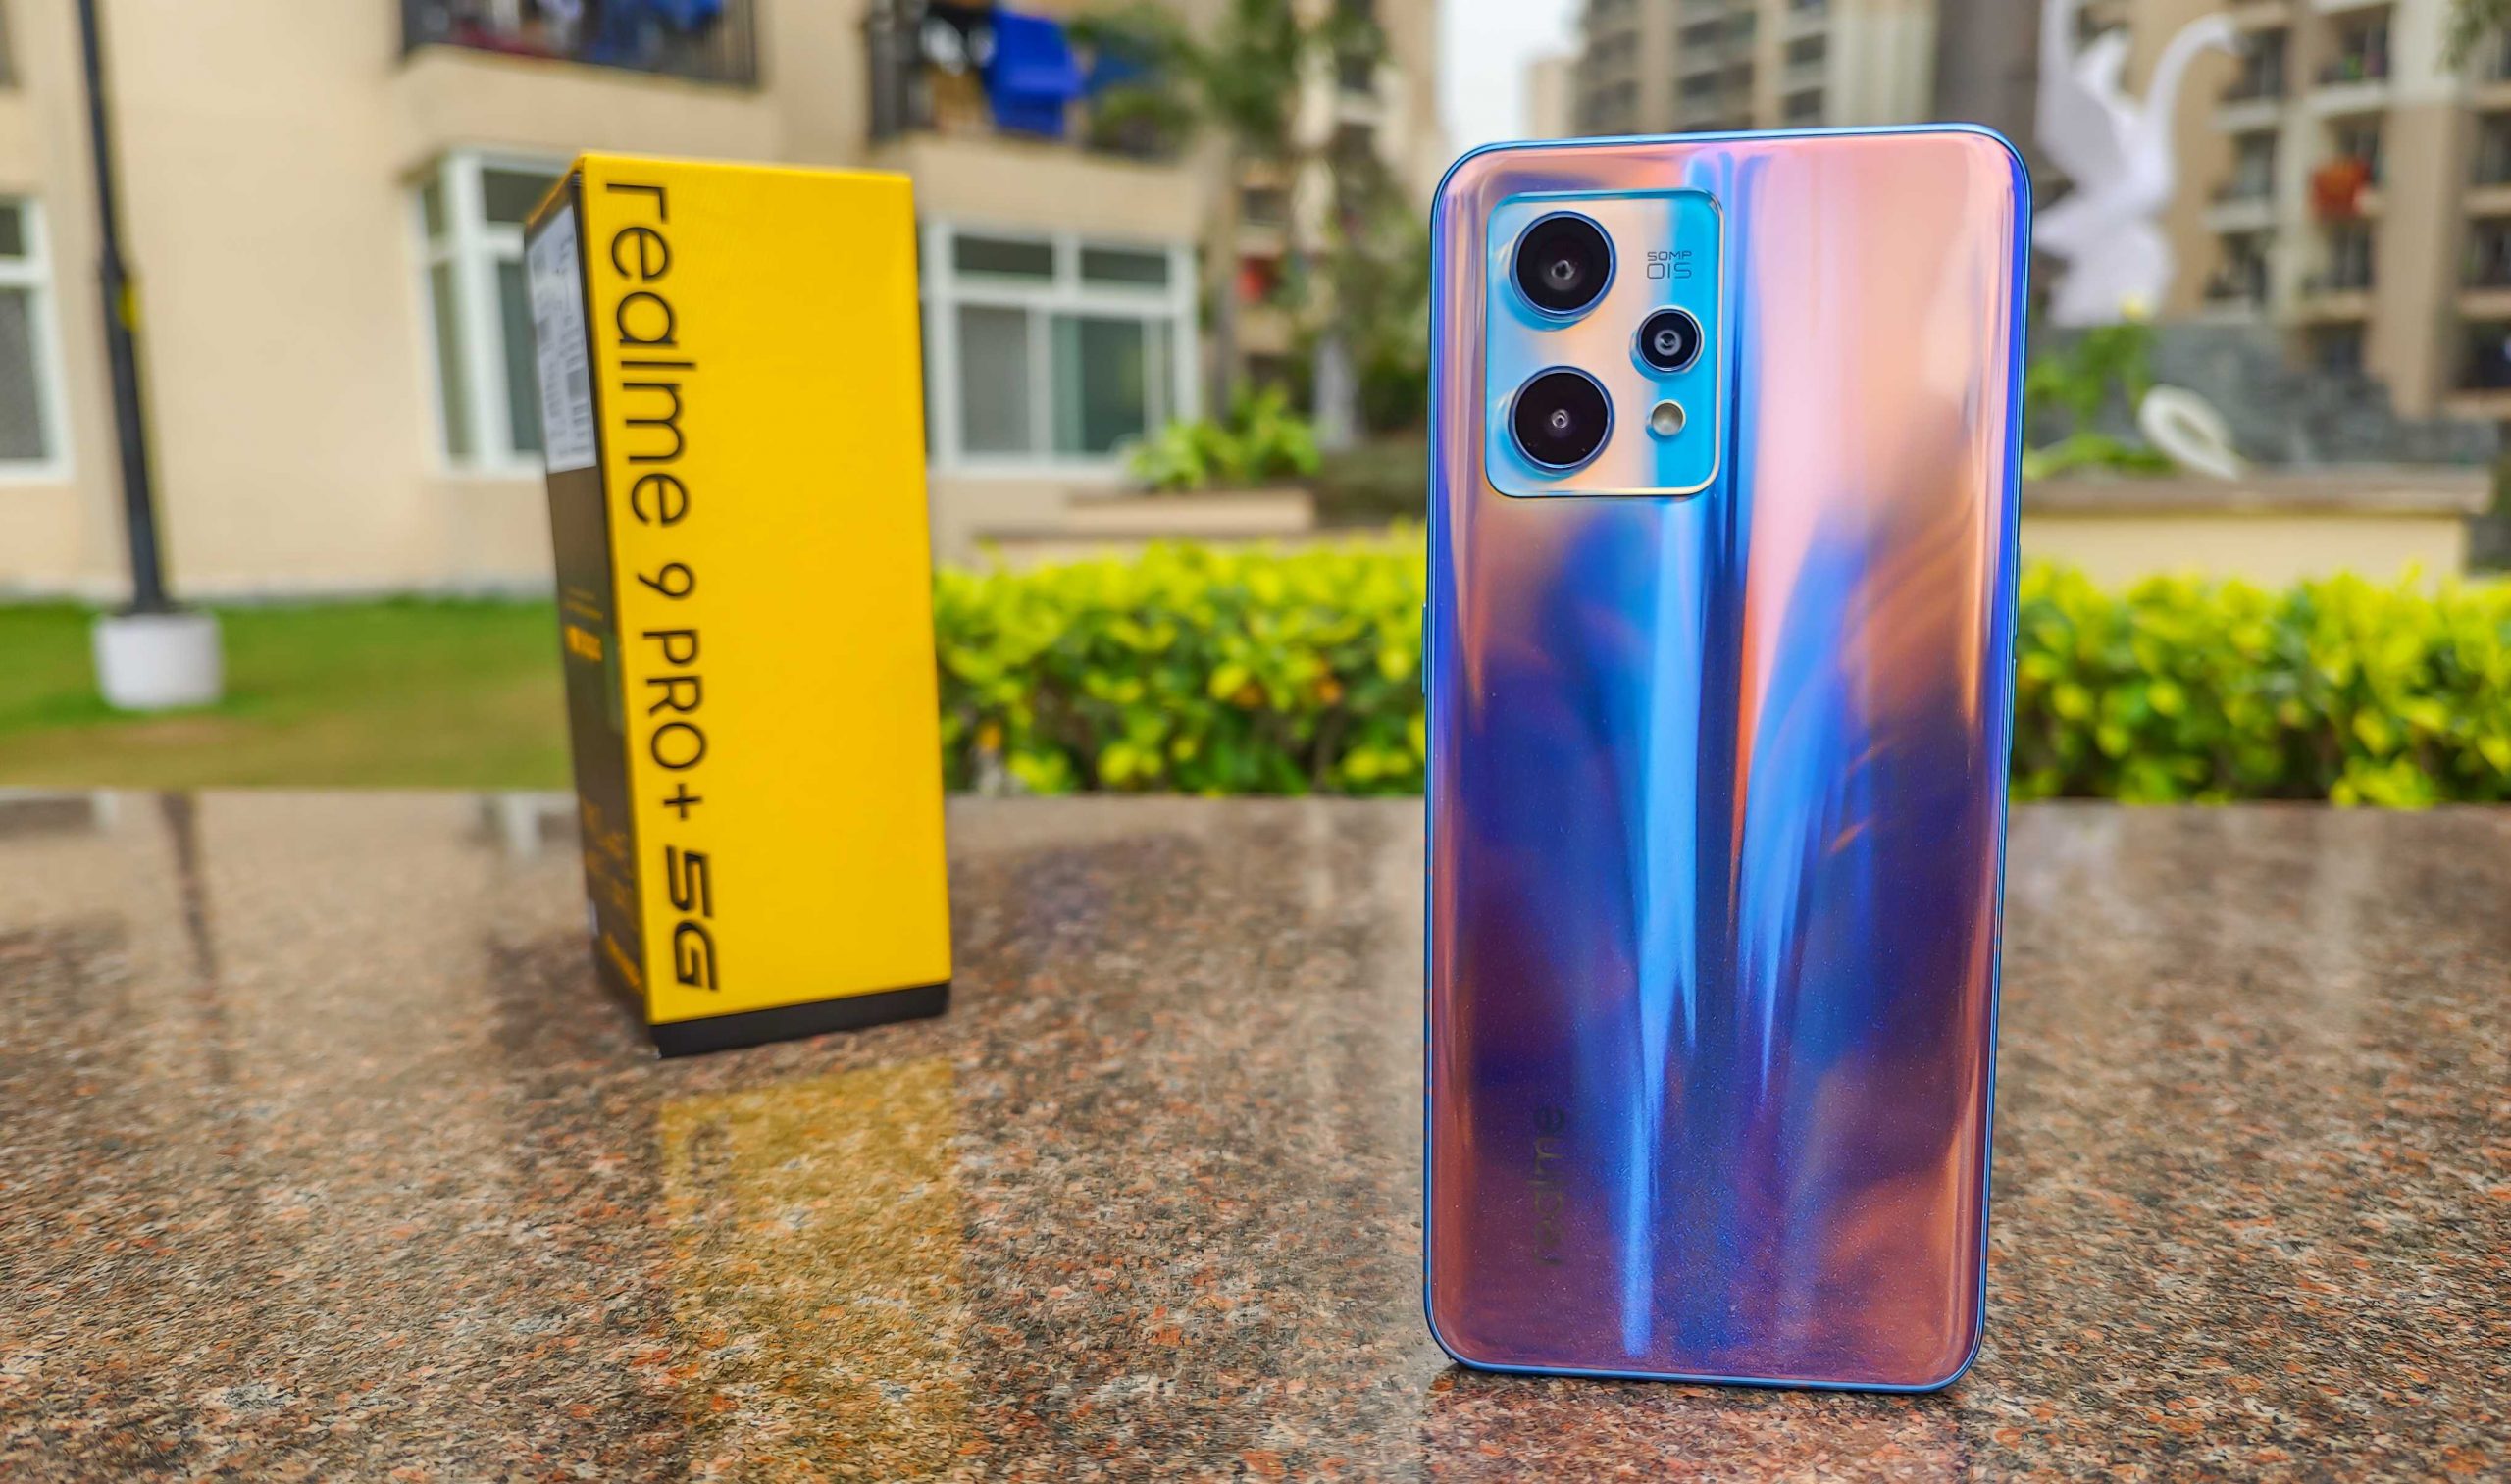 https://www.smartprix.com/bytes/wp-content/uploads/2022/03/Realme-9-Pro-5G-review-with-pros-and-cons-19-scaled.jpg